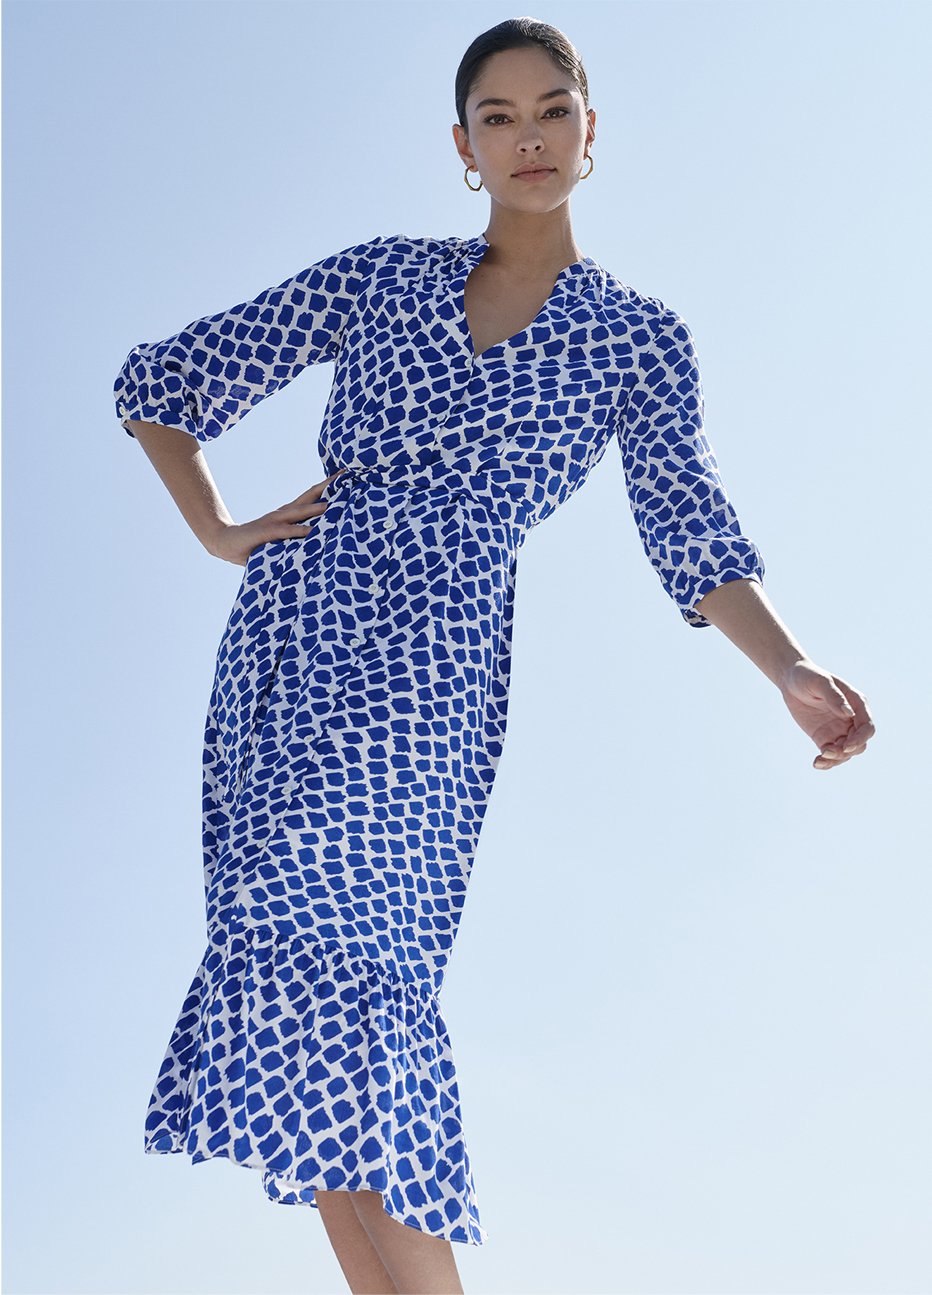 Fit and flare dress with a spot pattern in blue and white featuring a frill hem and a tie waist paired with black espadrille wedge sandals by Hobbs.